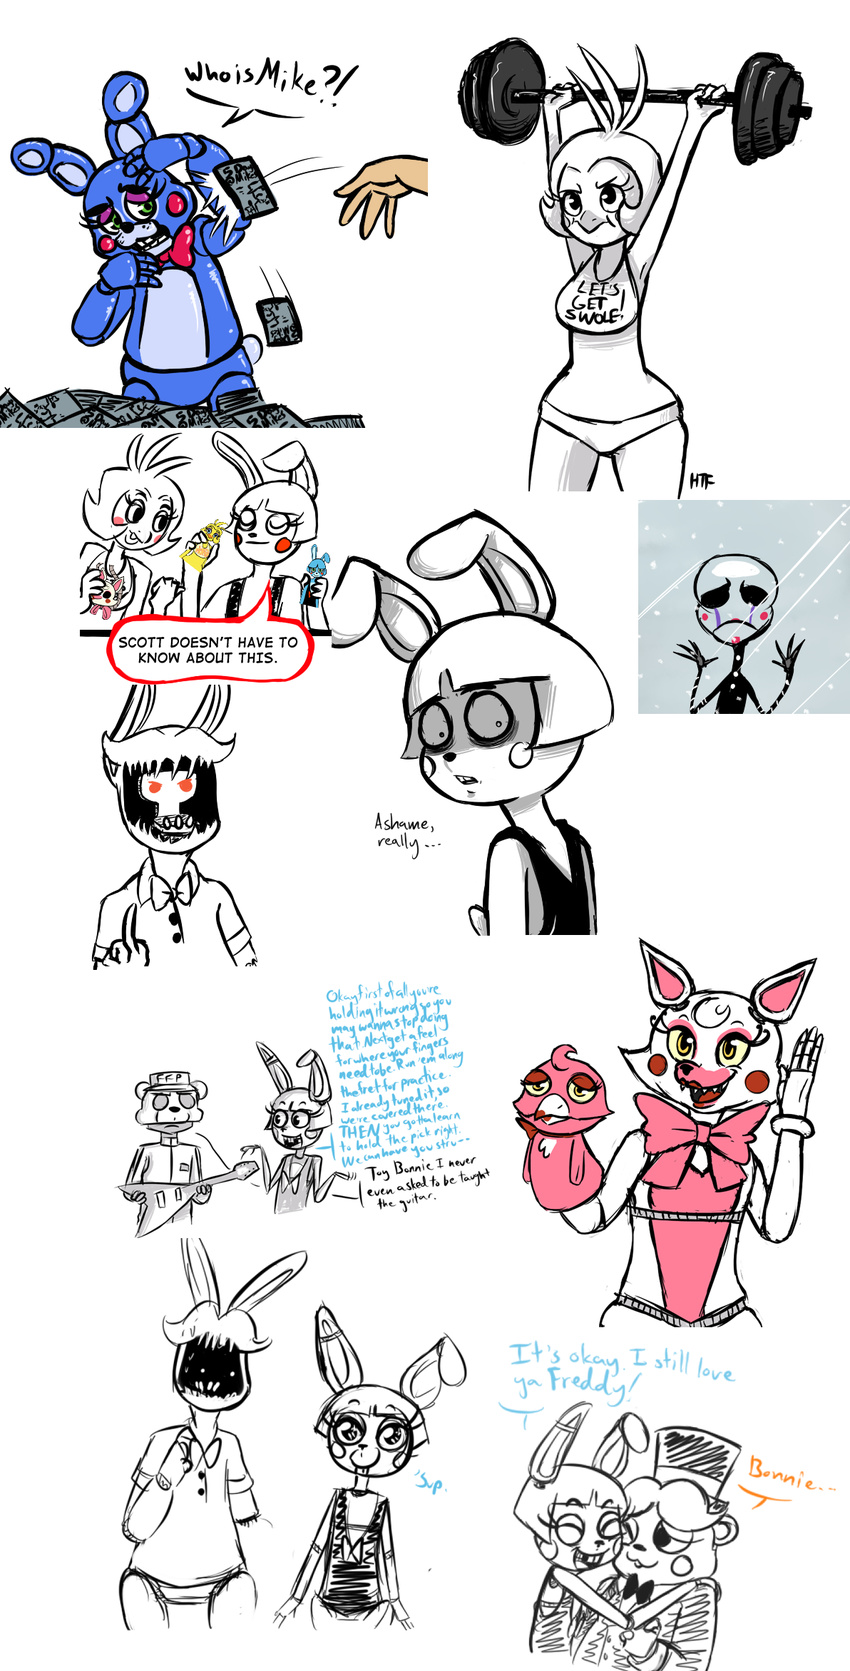 2015 animatronic anthro avian barbell bear bib bird bonnie_(fnaf) canine chicken dialogue english_text female five_nights_at_freddy's five_nights_at_freddy's_2 fox group guitar hand_puppet hat hug human humanoid inkyfrog jeremy_fitzgerald lagomorph looking_at_viewer machine male mammal mangle_(fnaf) marionette_(fnaf) mask middle_finger musical_instrument puppet rabbit robot simple_background text throwing top_hat toy_bonnie_(fnaf) toy_chica_(fnaf) toy_freddy_(fnaf) video_games weights white_background withered_bonnie_(fnaf)